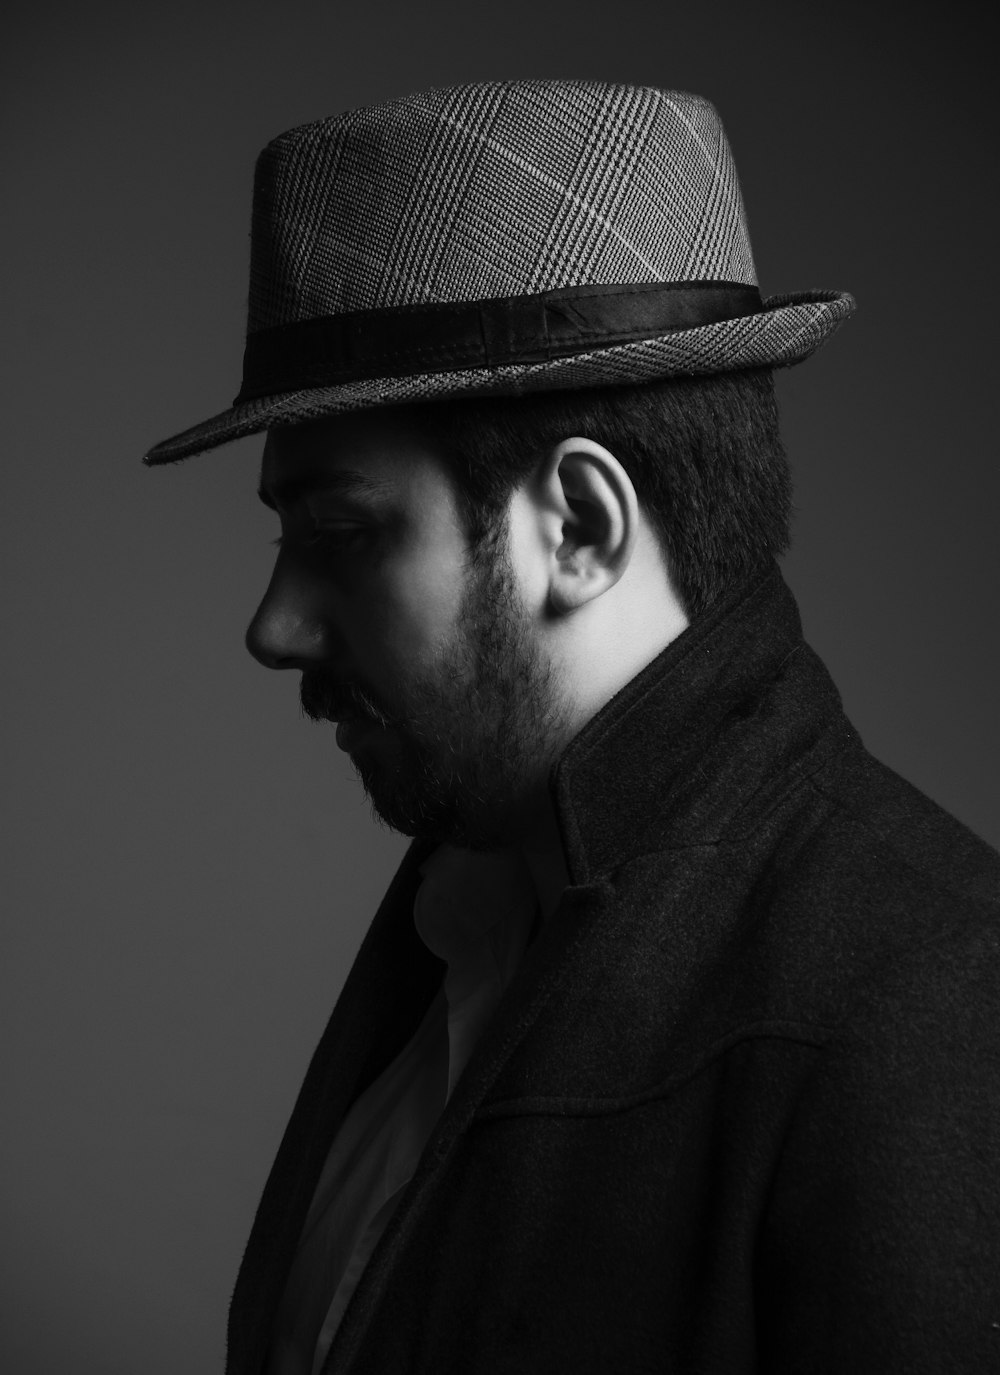 man wearing hat in grayscale photography